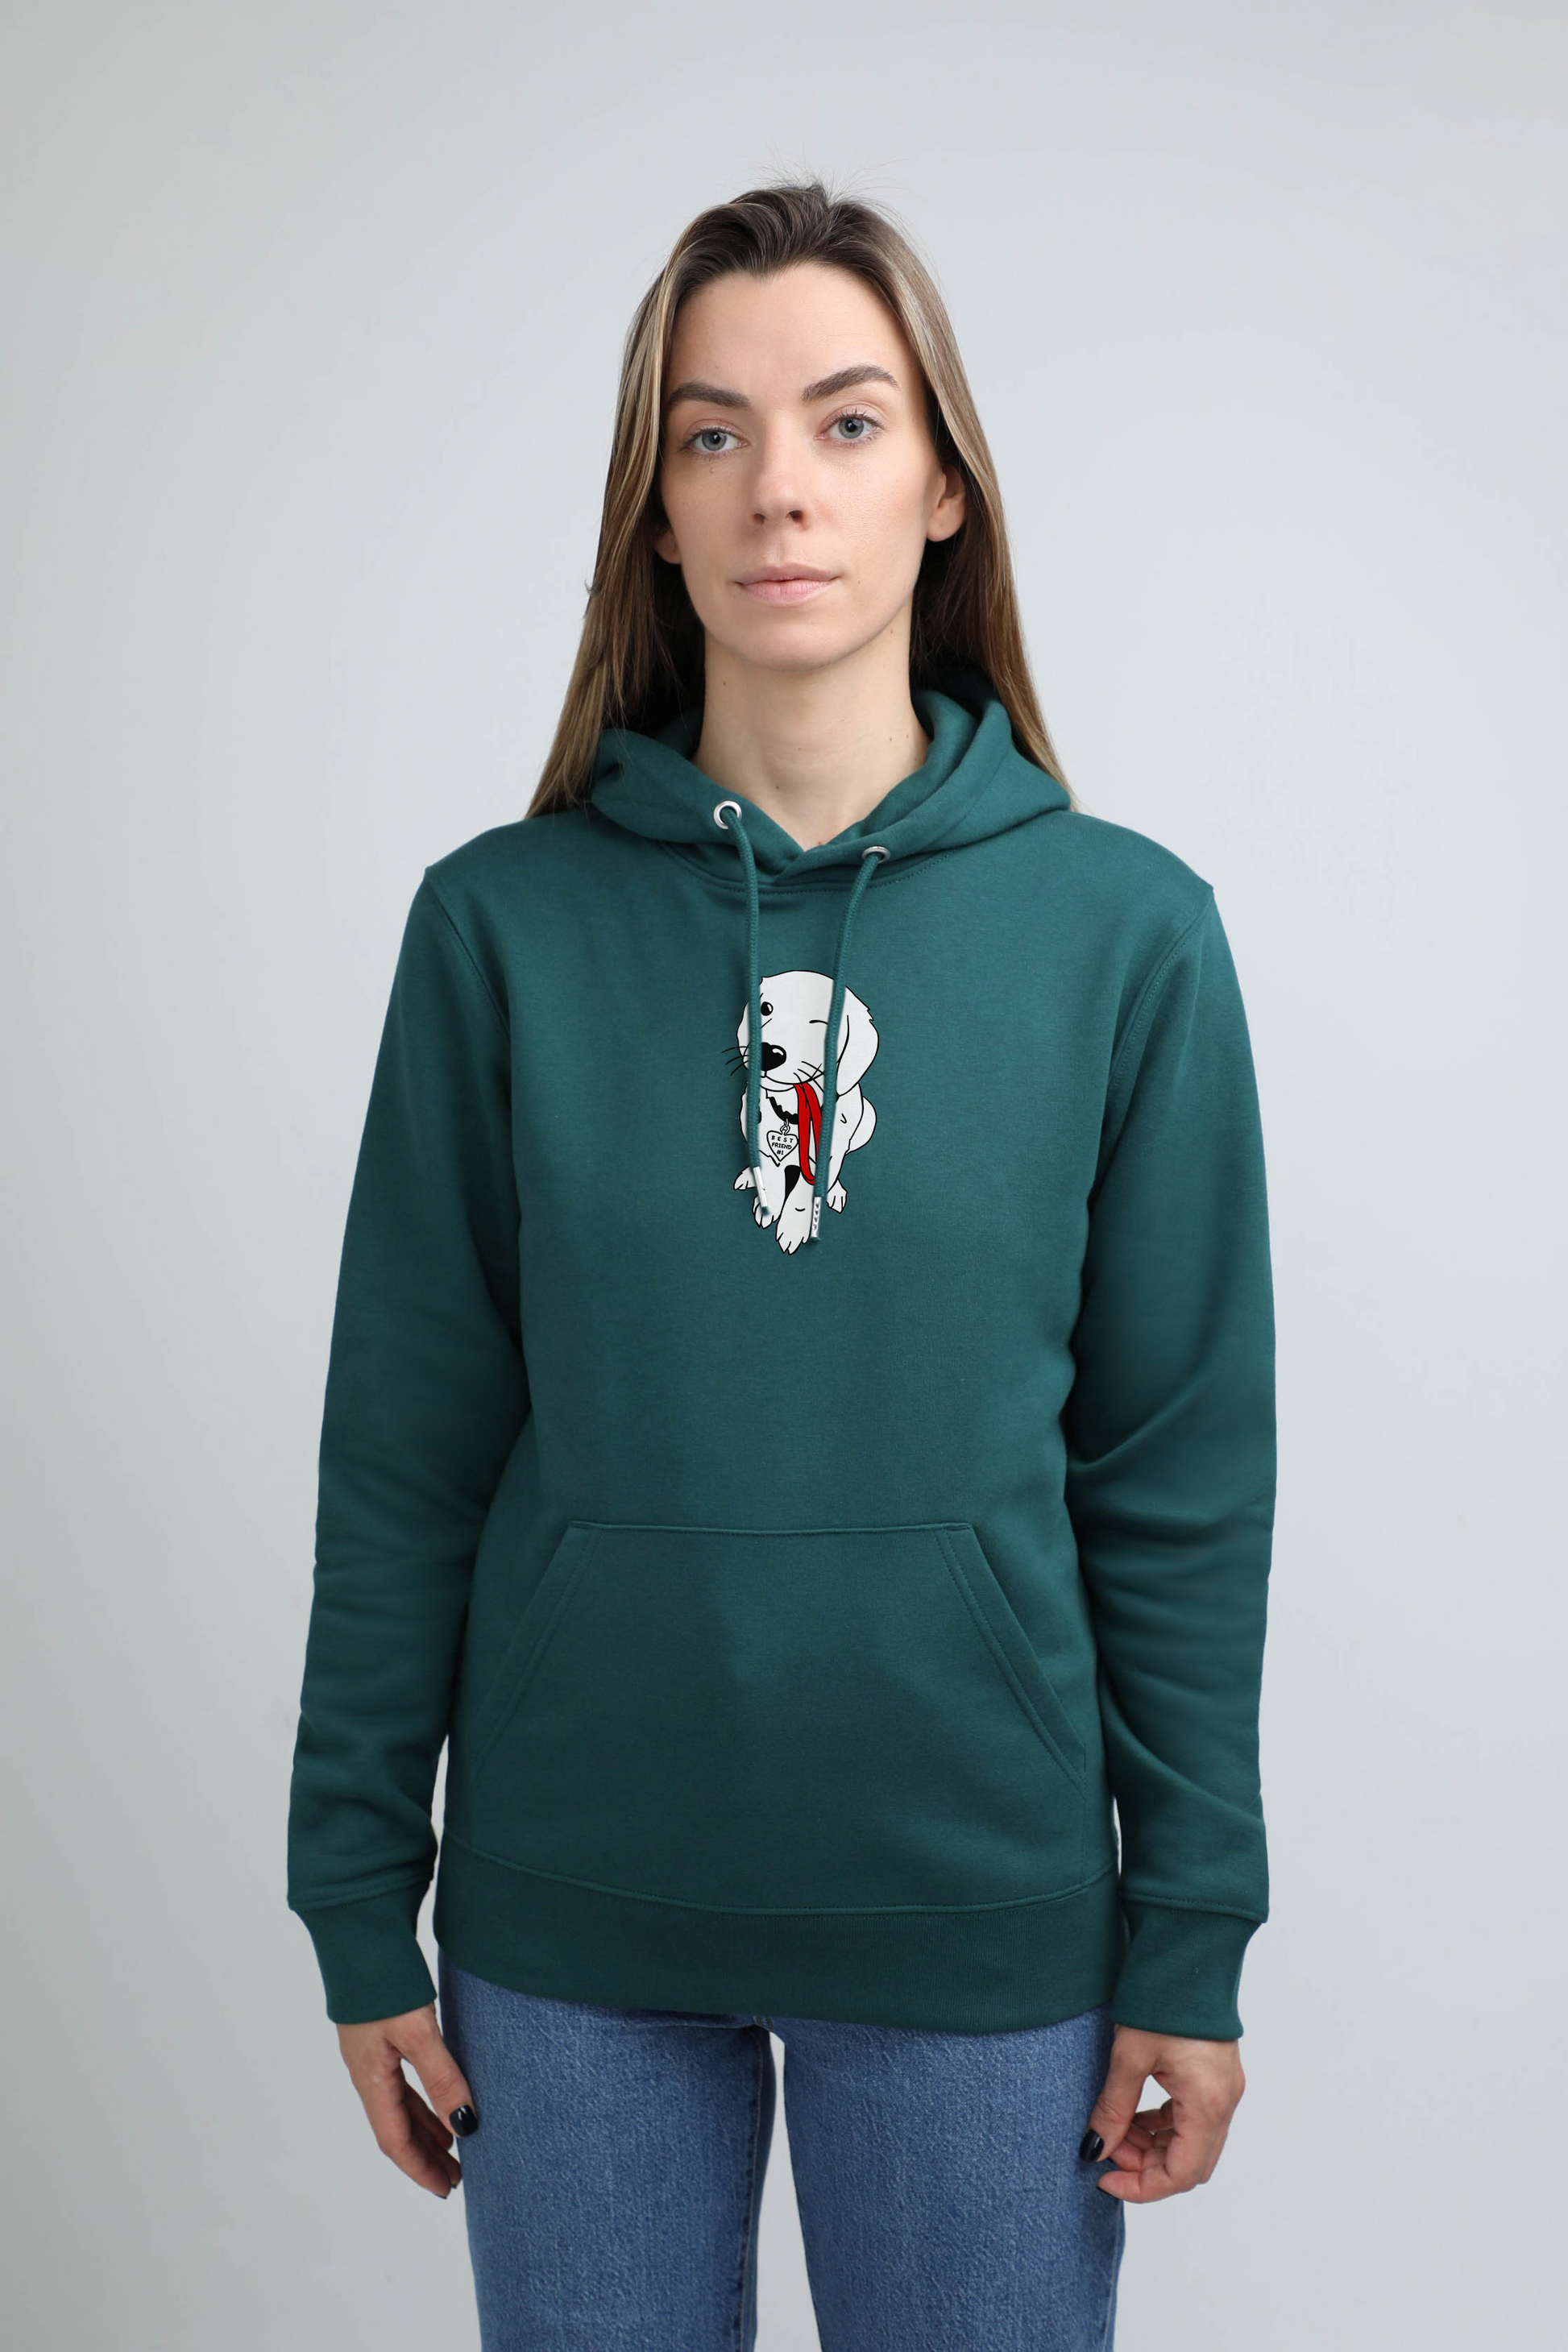 Best friend | Hoodie with dog. Regular fit | Unisex by My Wild Other